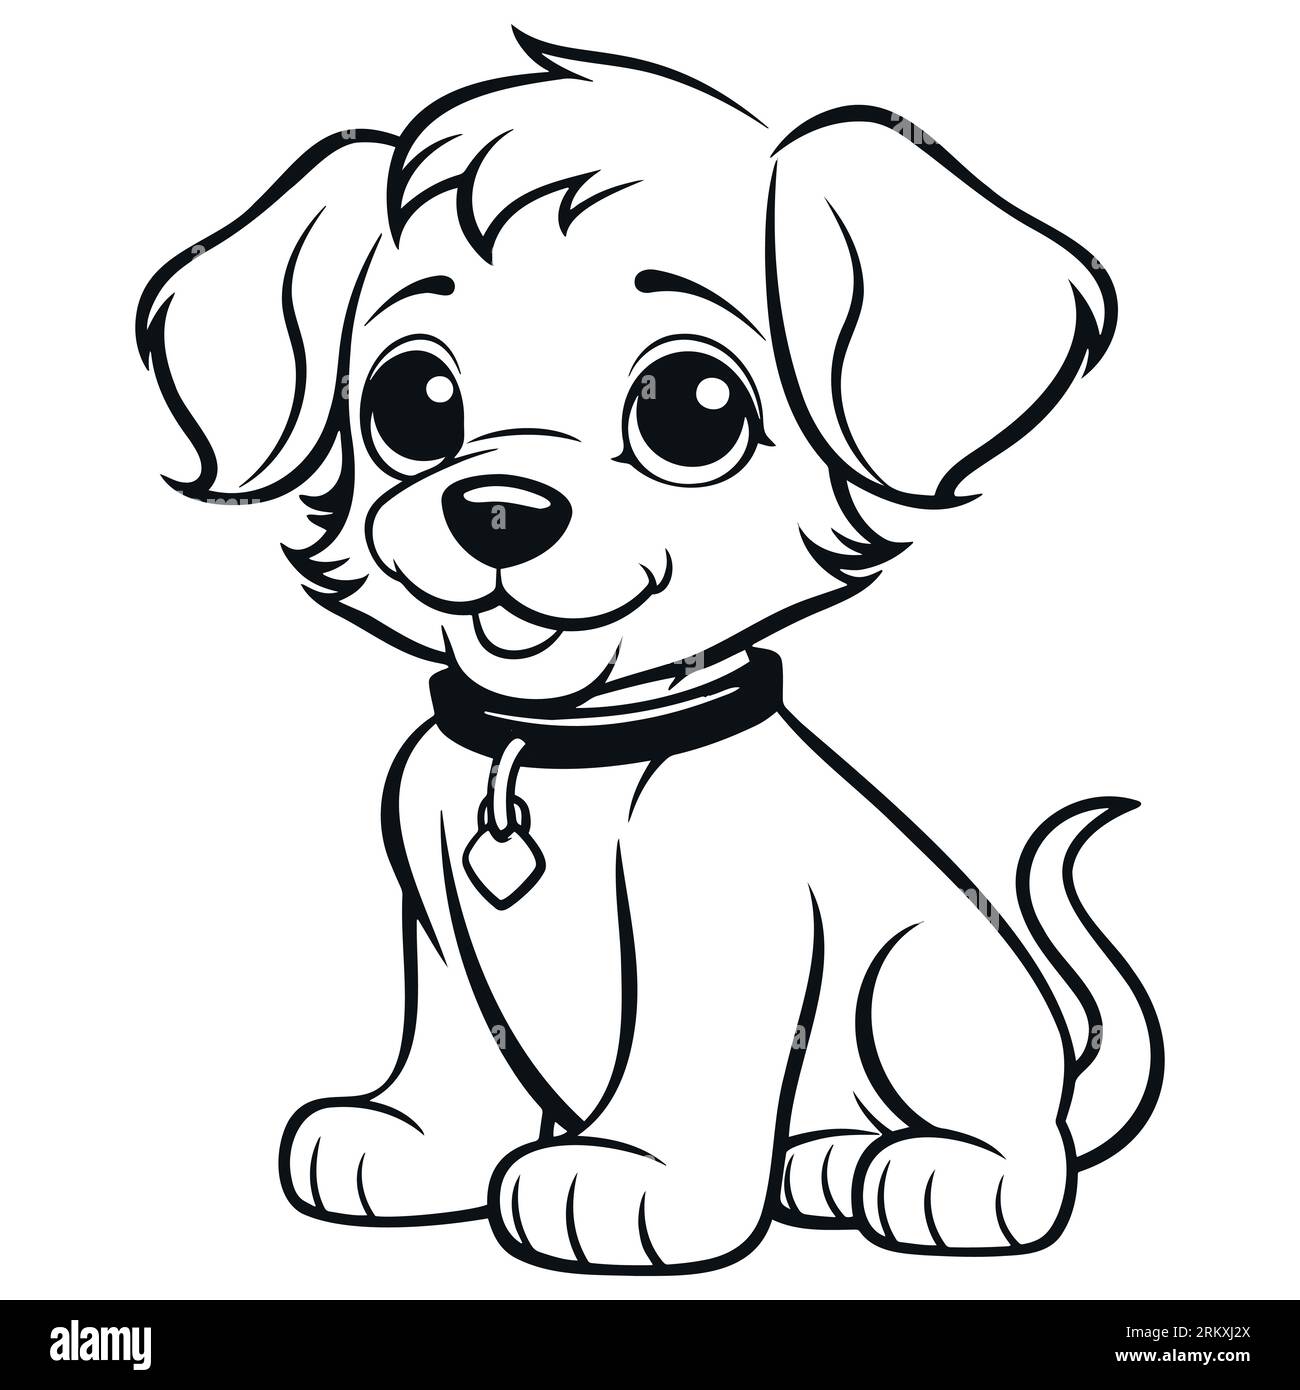 Pitbull pup- free lineart by Palace-Of-Dreams on DeviantArt